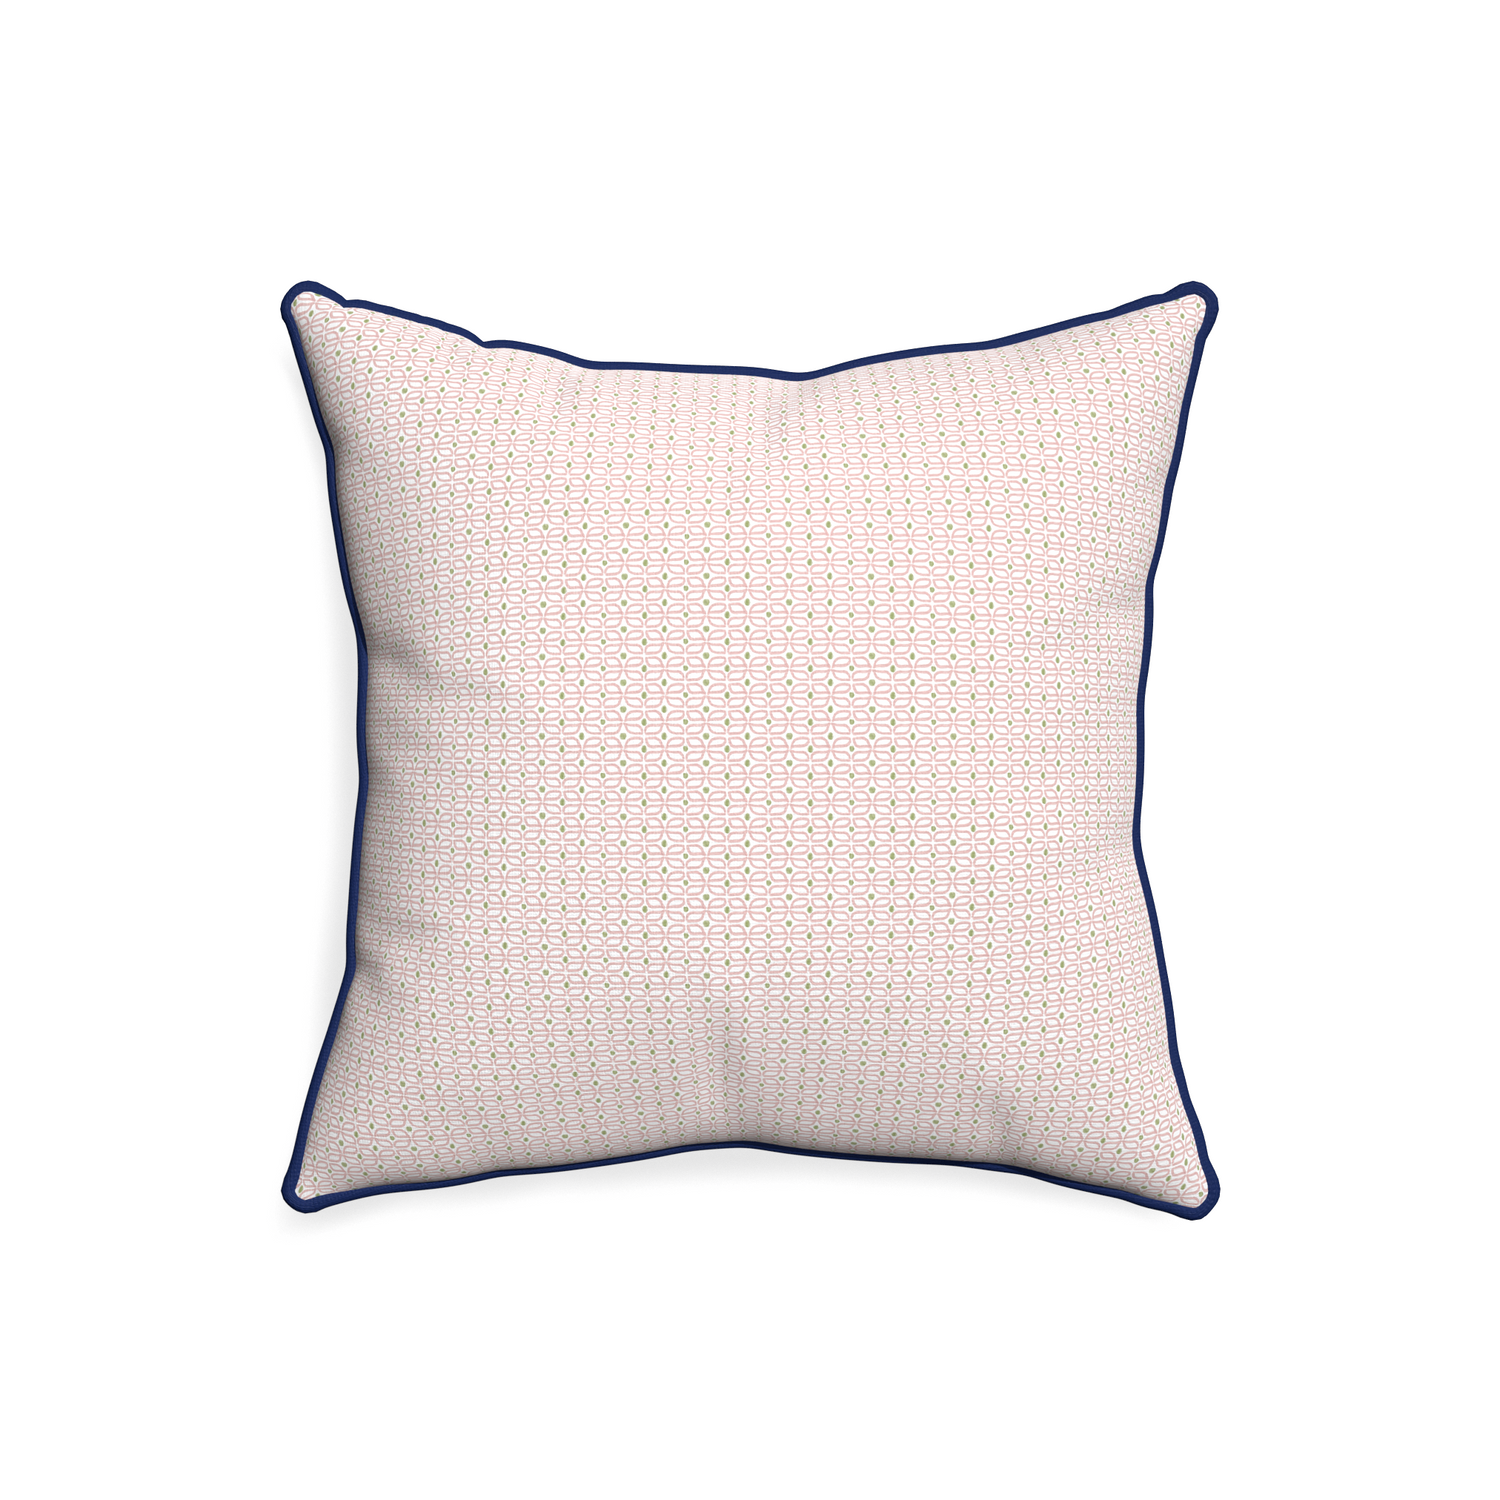 20-square loomi pink custom pillow with midnight piping on white background